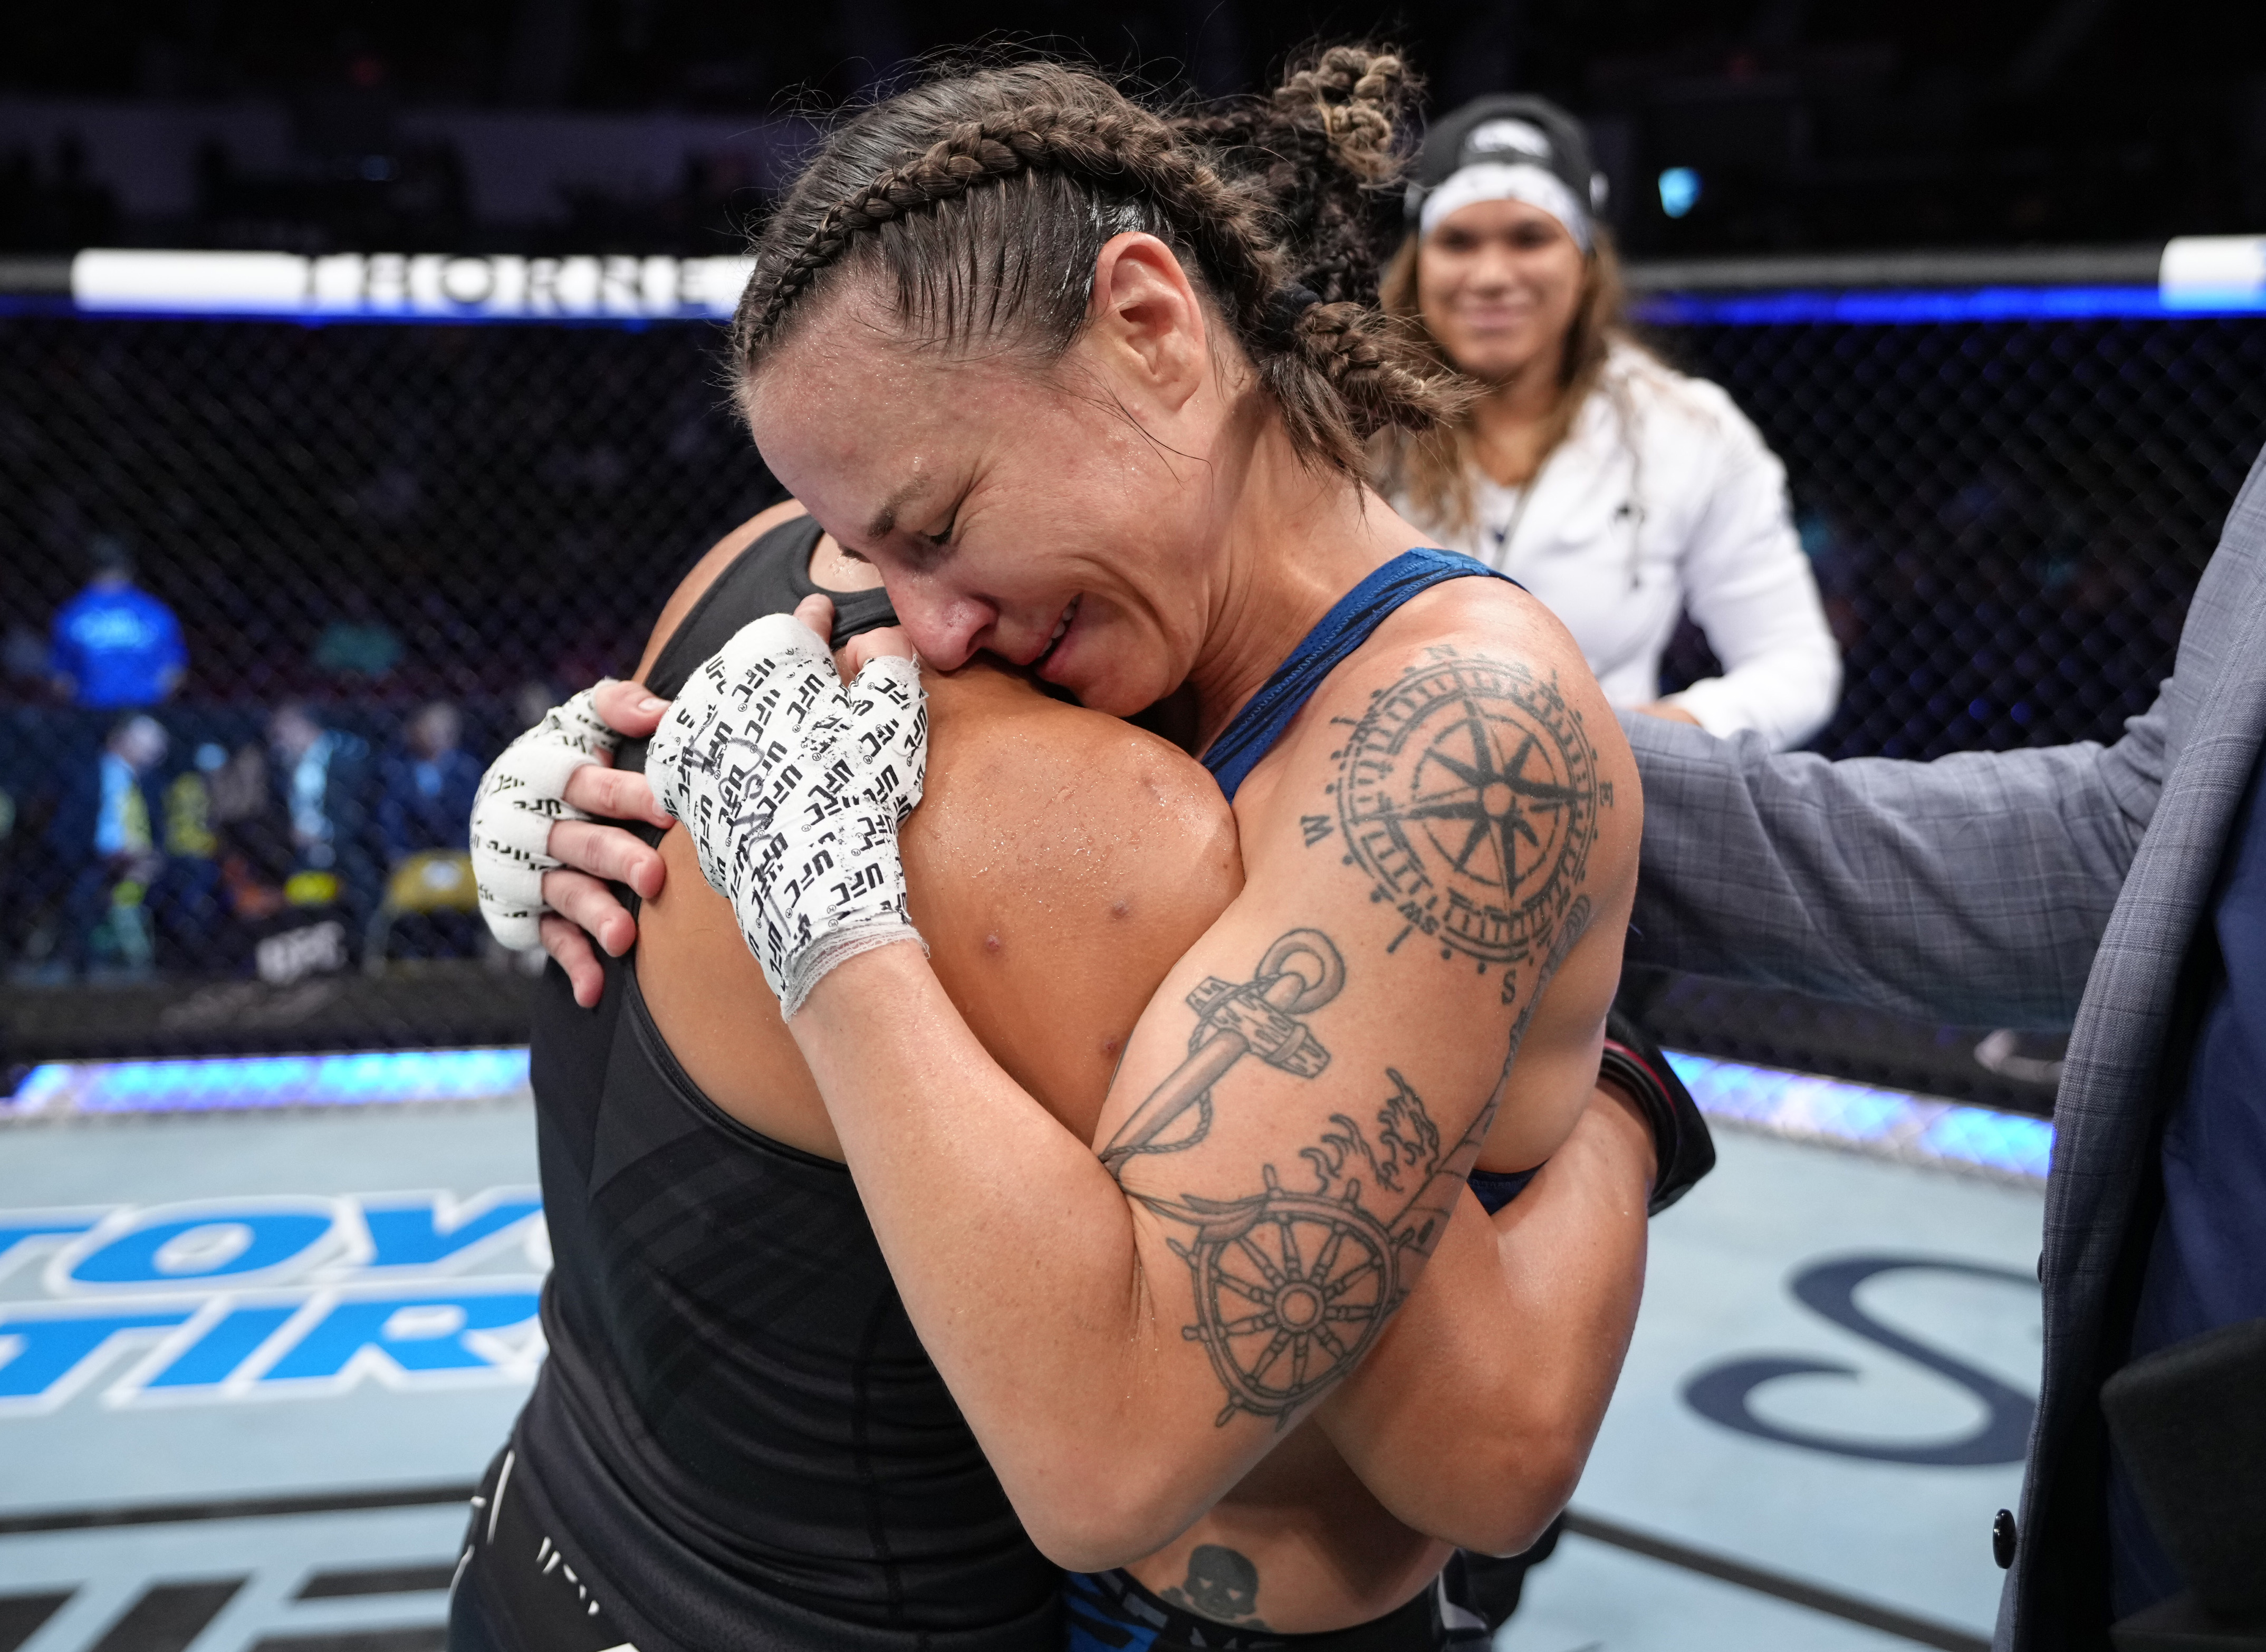 Nina Nunes retired from the sport of MMA after winning a split decision over Cynthia Calvillo